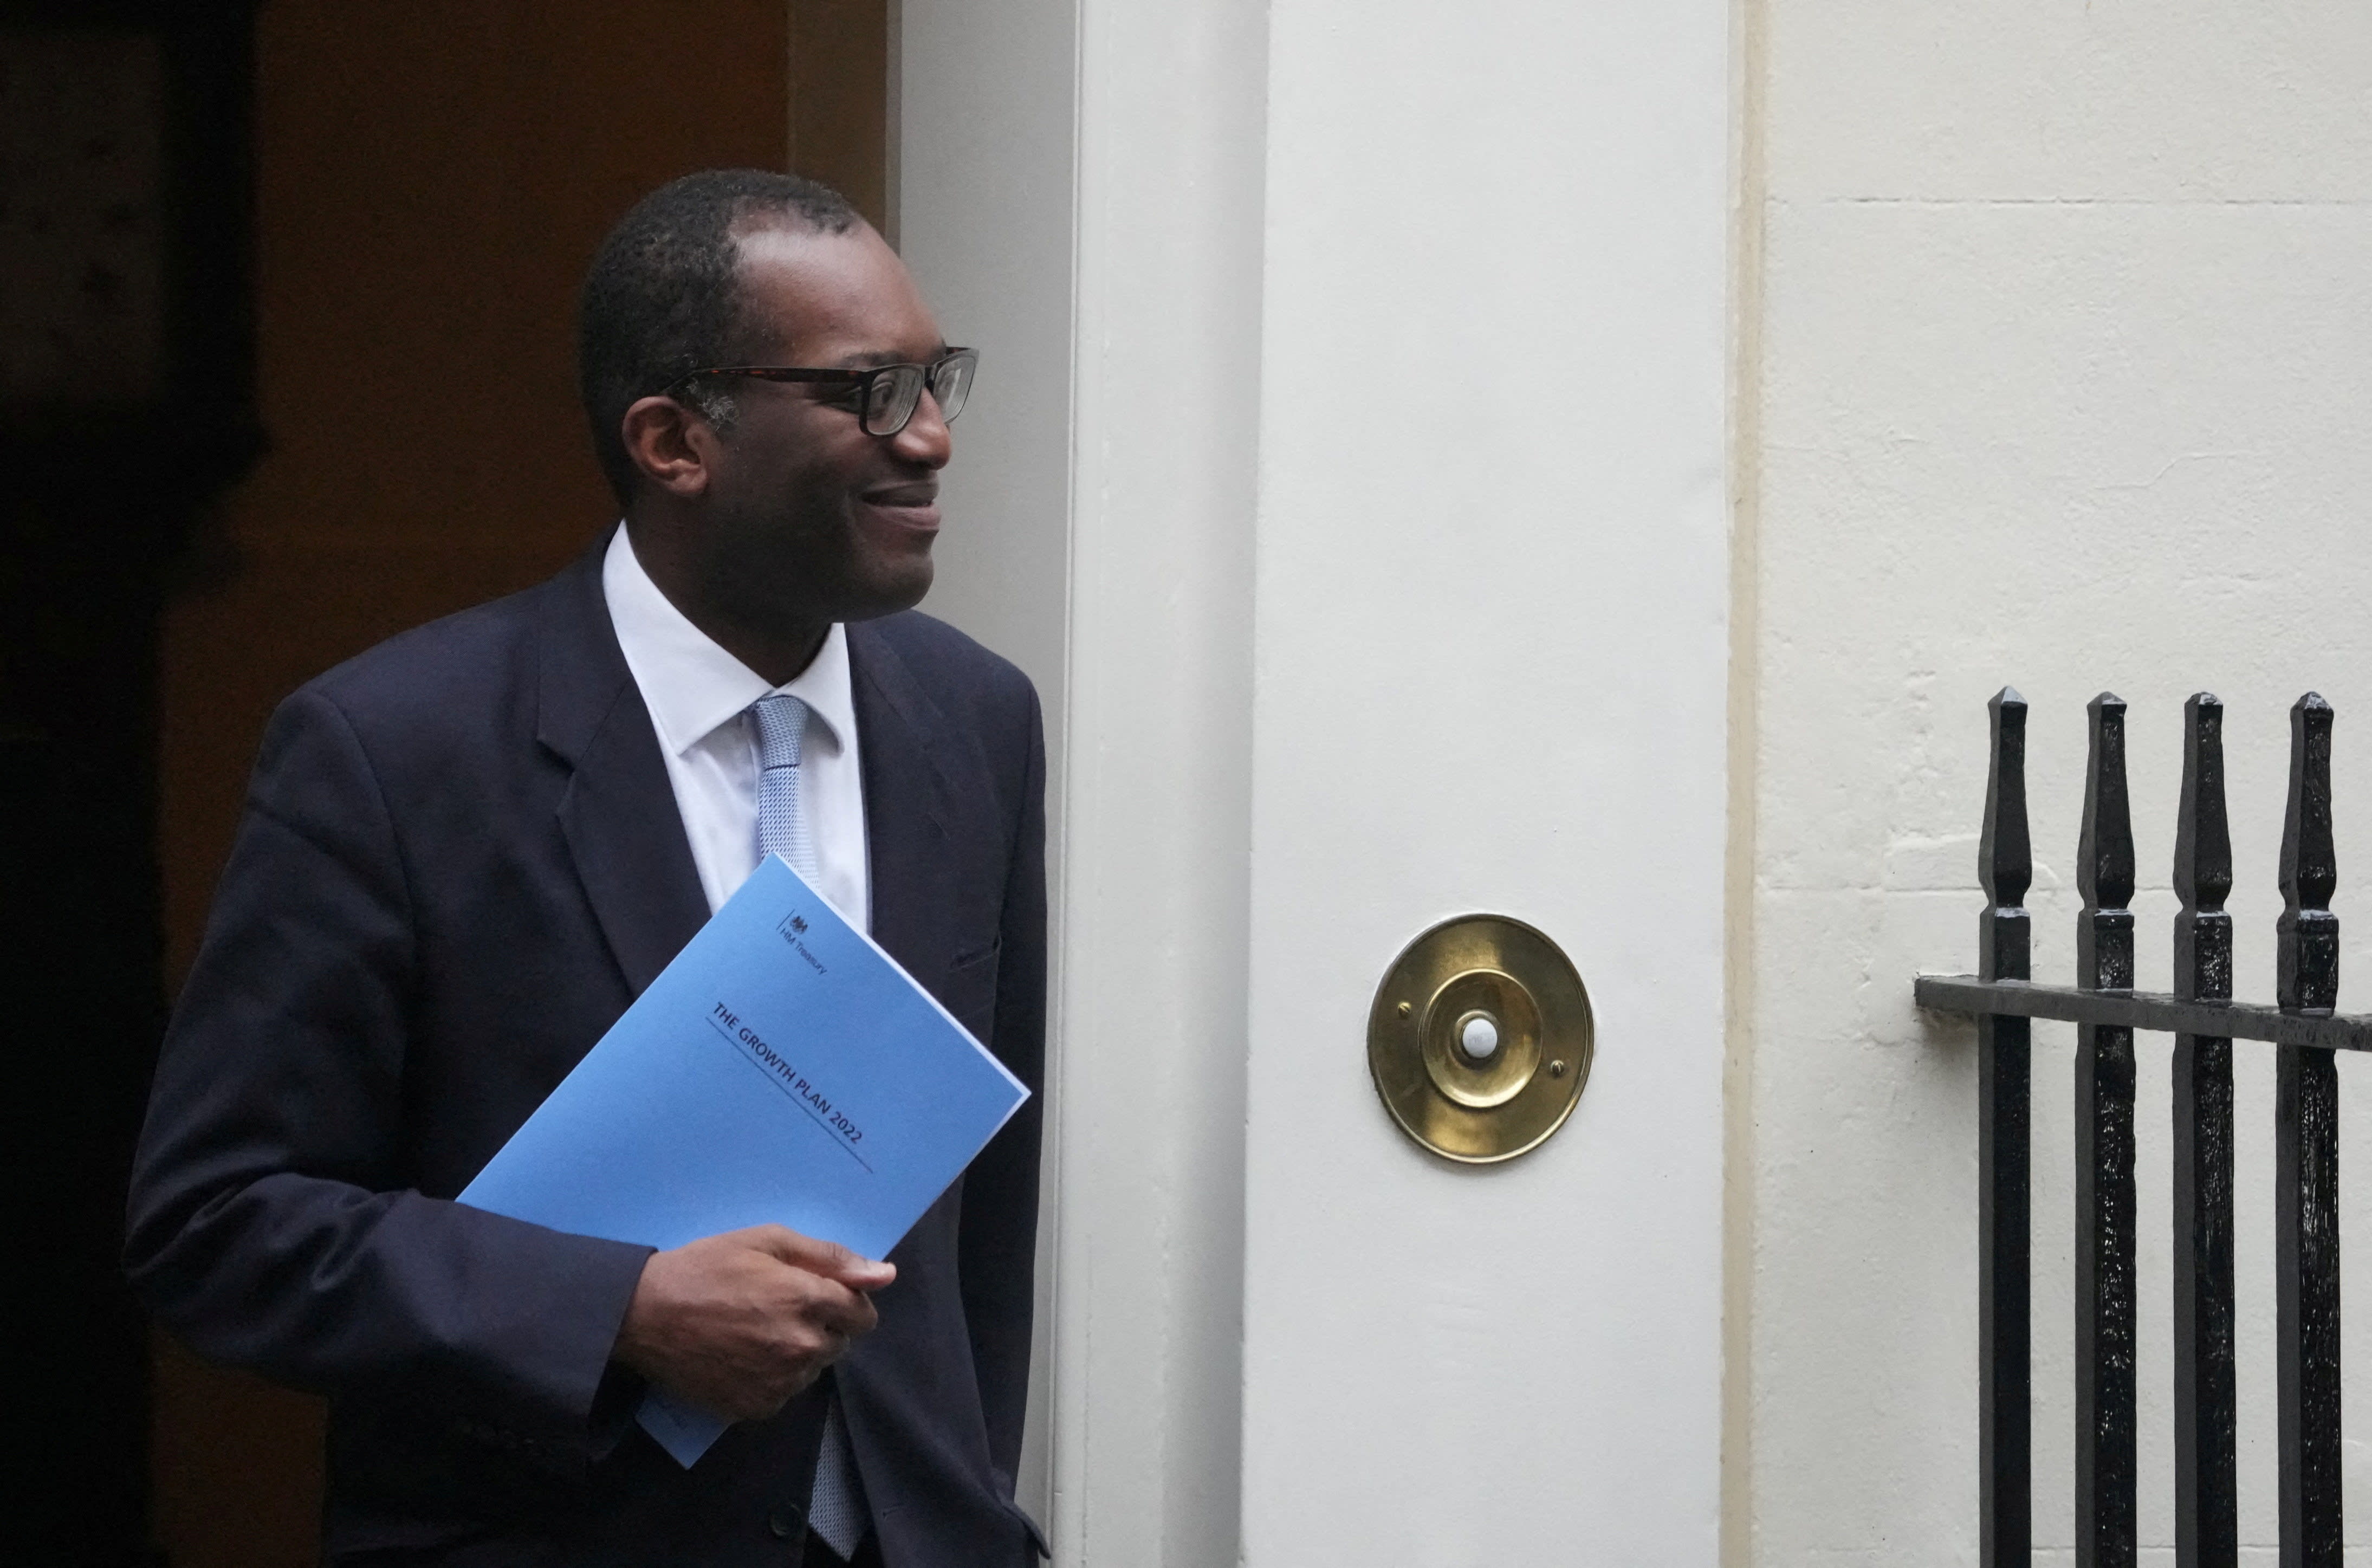 Speaking to the House of Commons today (September 23), Chancellor Kwasi Kwarteng said from April, workers across the UK providing their services via a